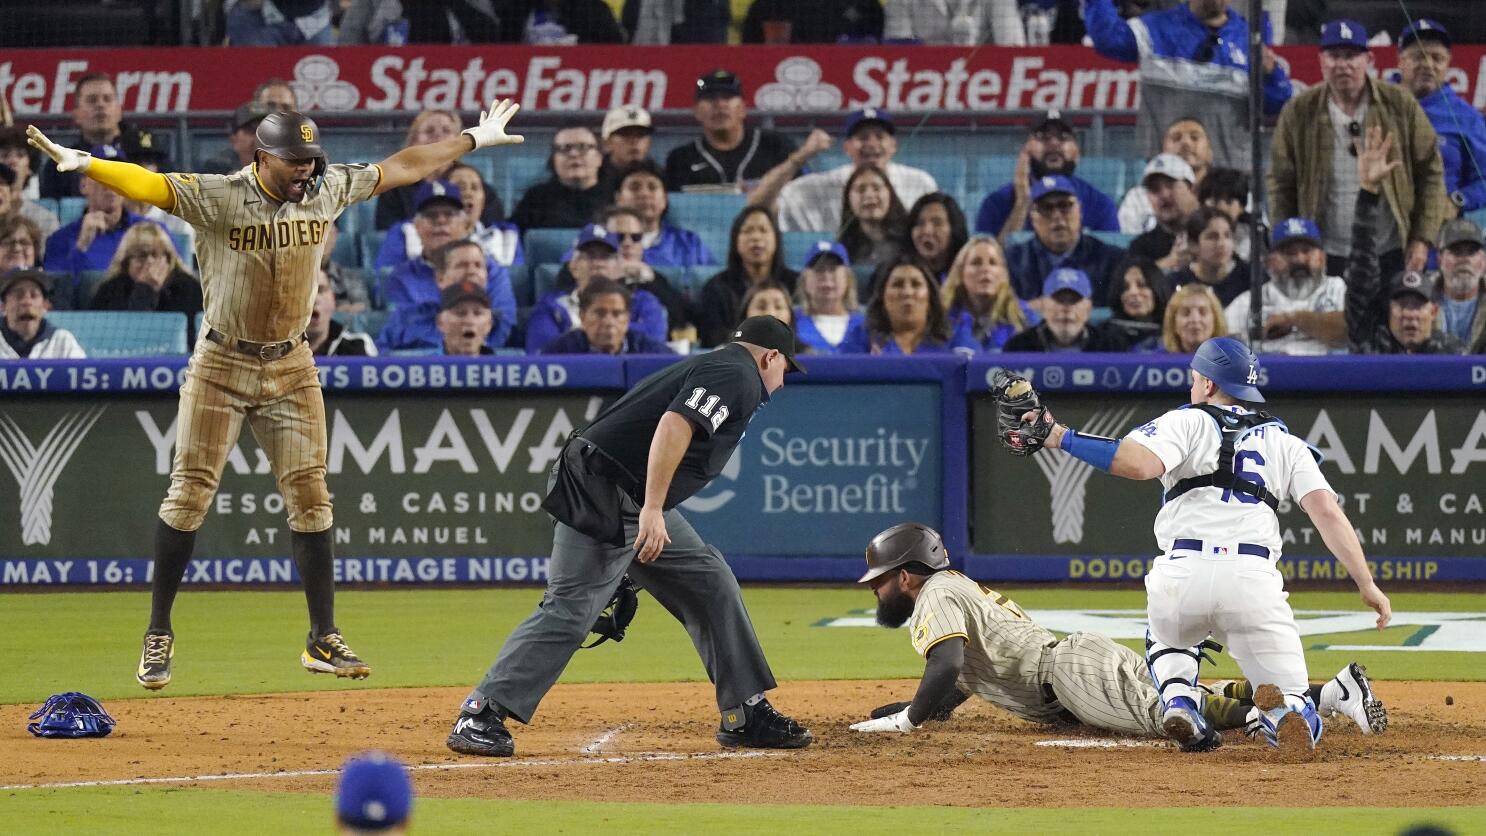 Manny gets pinch-hit grand slam for Dodgers - The San Diego Union-Tribune